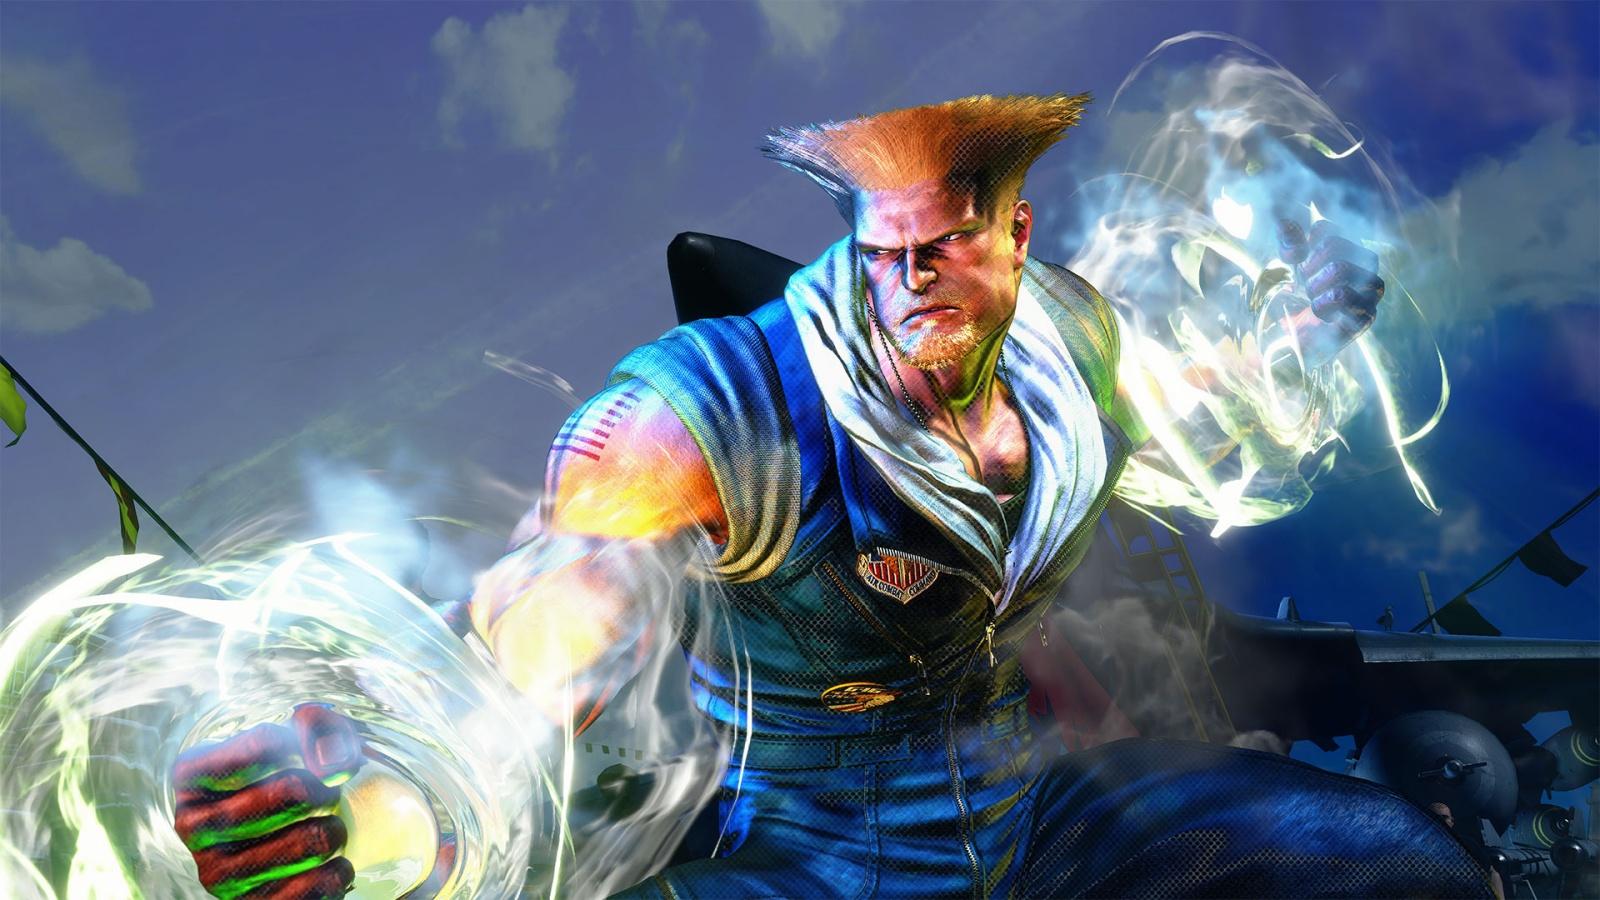 The Street Fighter film and TV rights have been acquired by Legendary